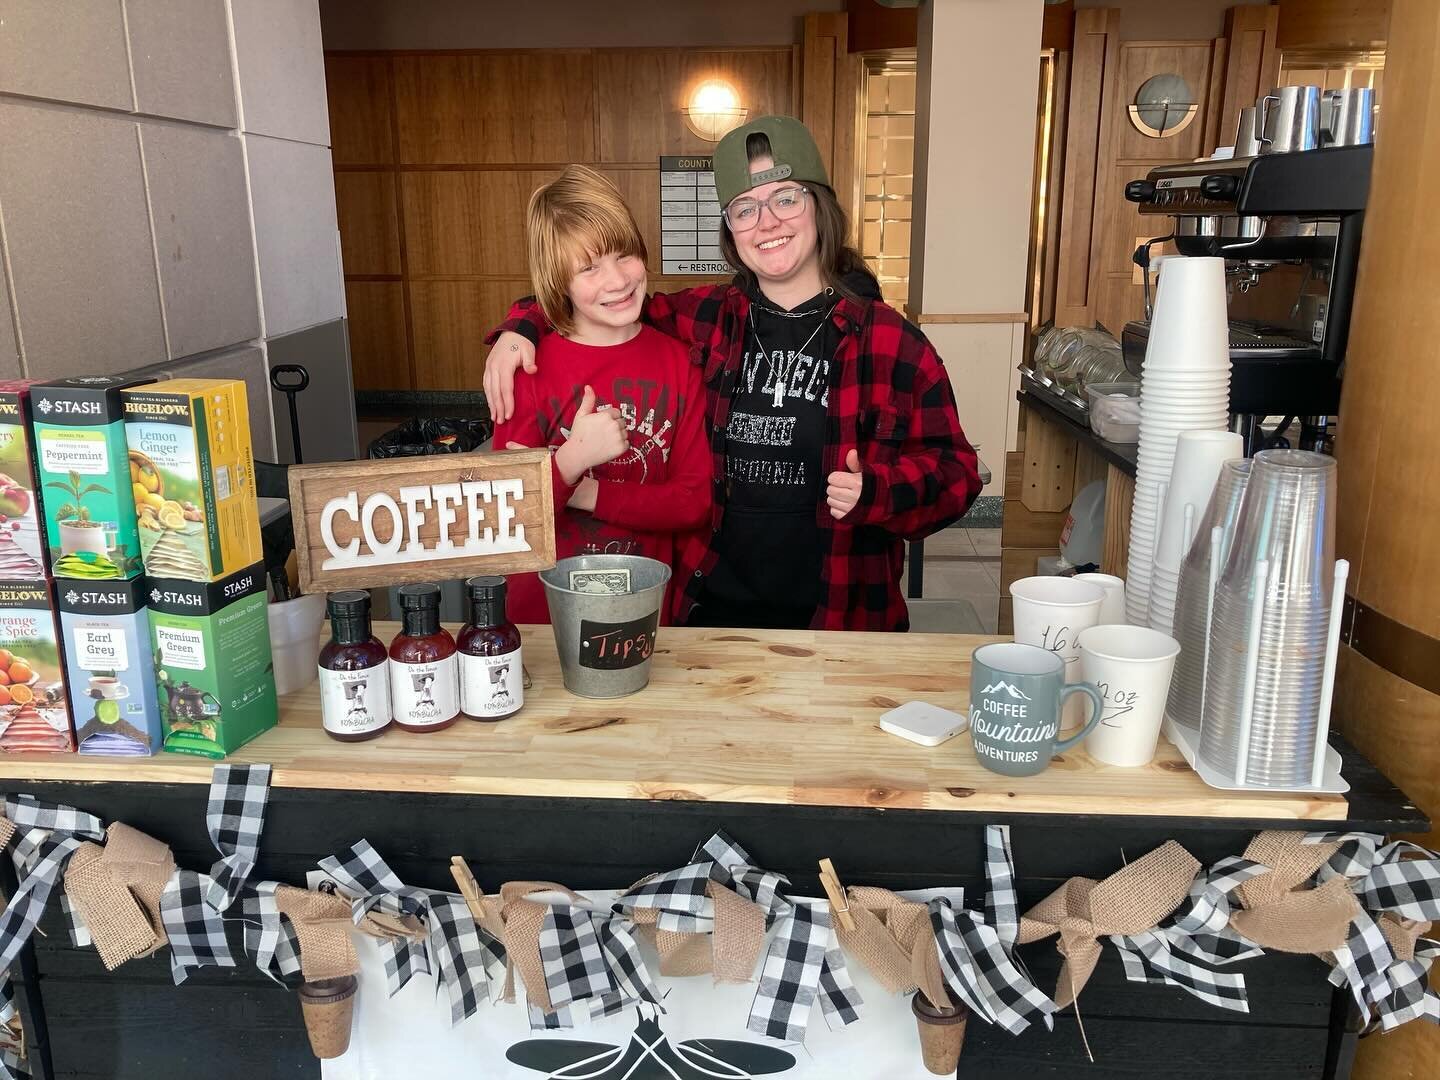 When your 11-year-old son asks you to come work during winter break, but it takes 3 hours for him to be awake enough to take orders. 😂 

Foster and Jazzy made a good pair this morning. ❤️

#coffeecommunity #mompreneur #mompreneurslife #coffeetime #j